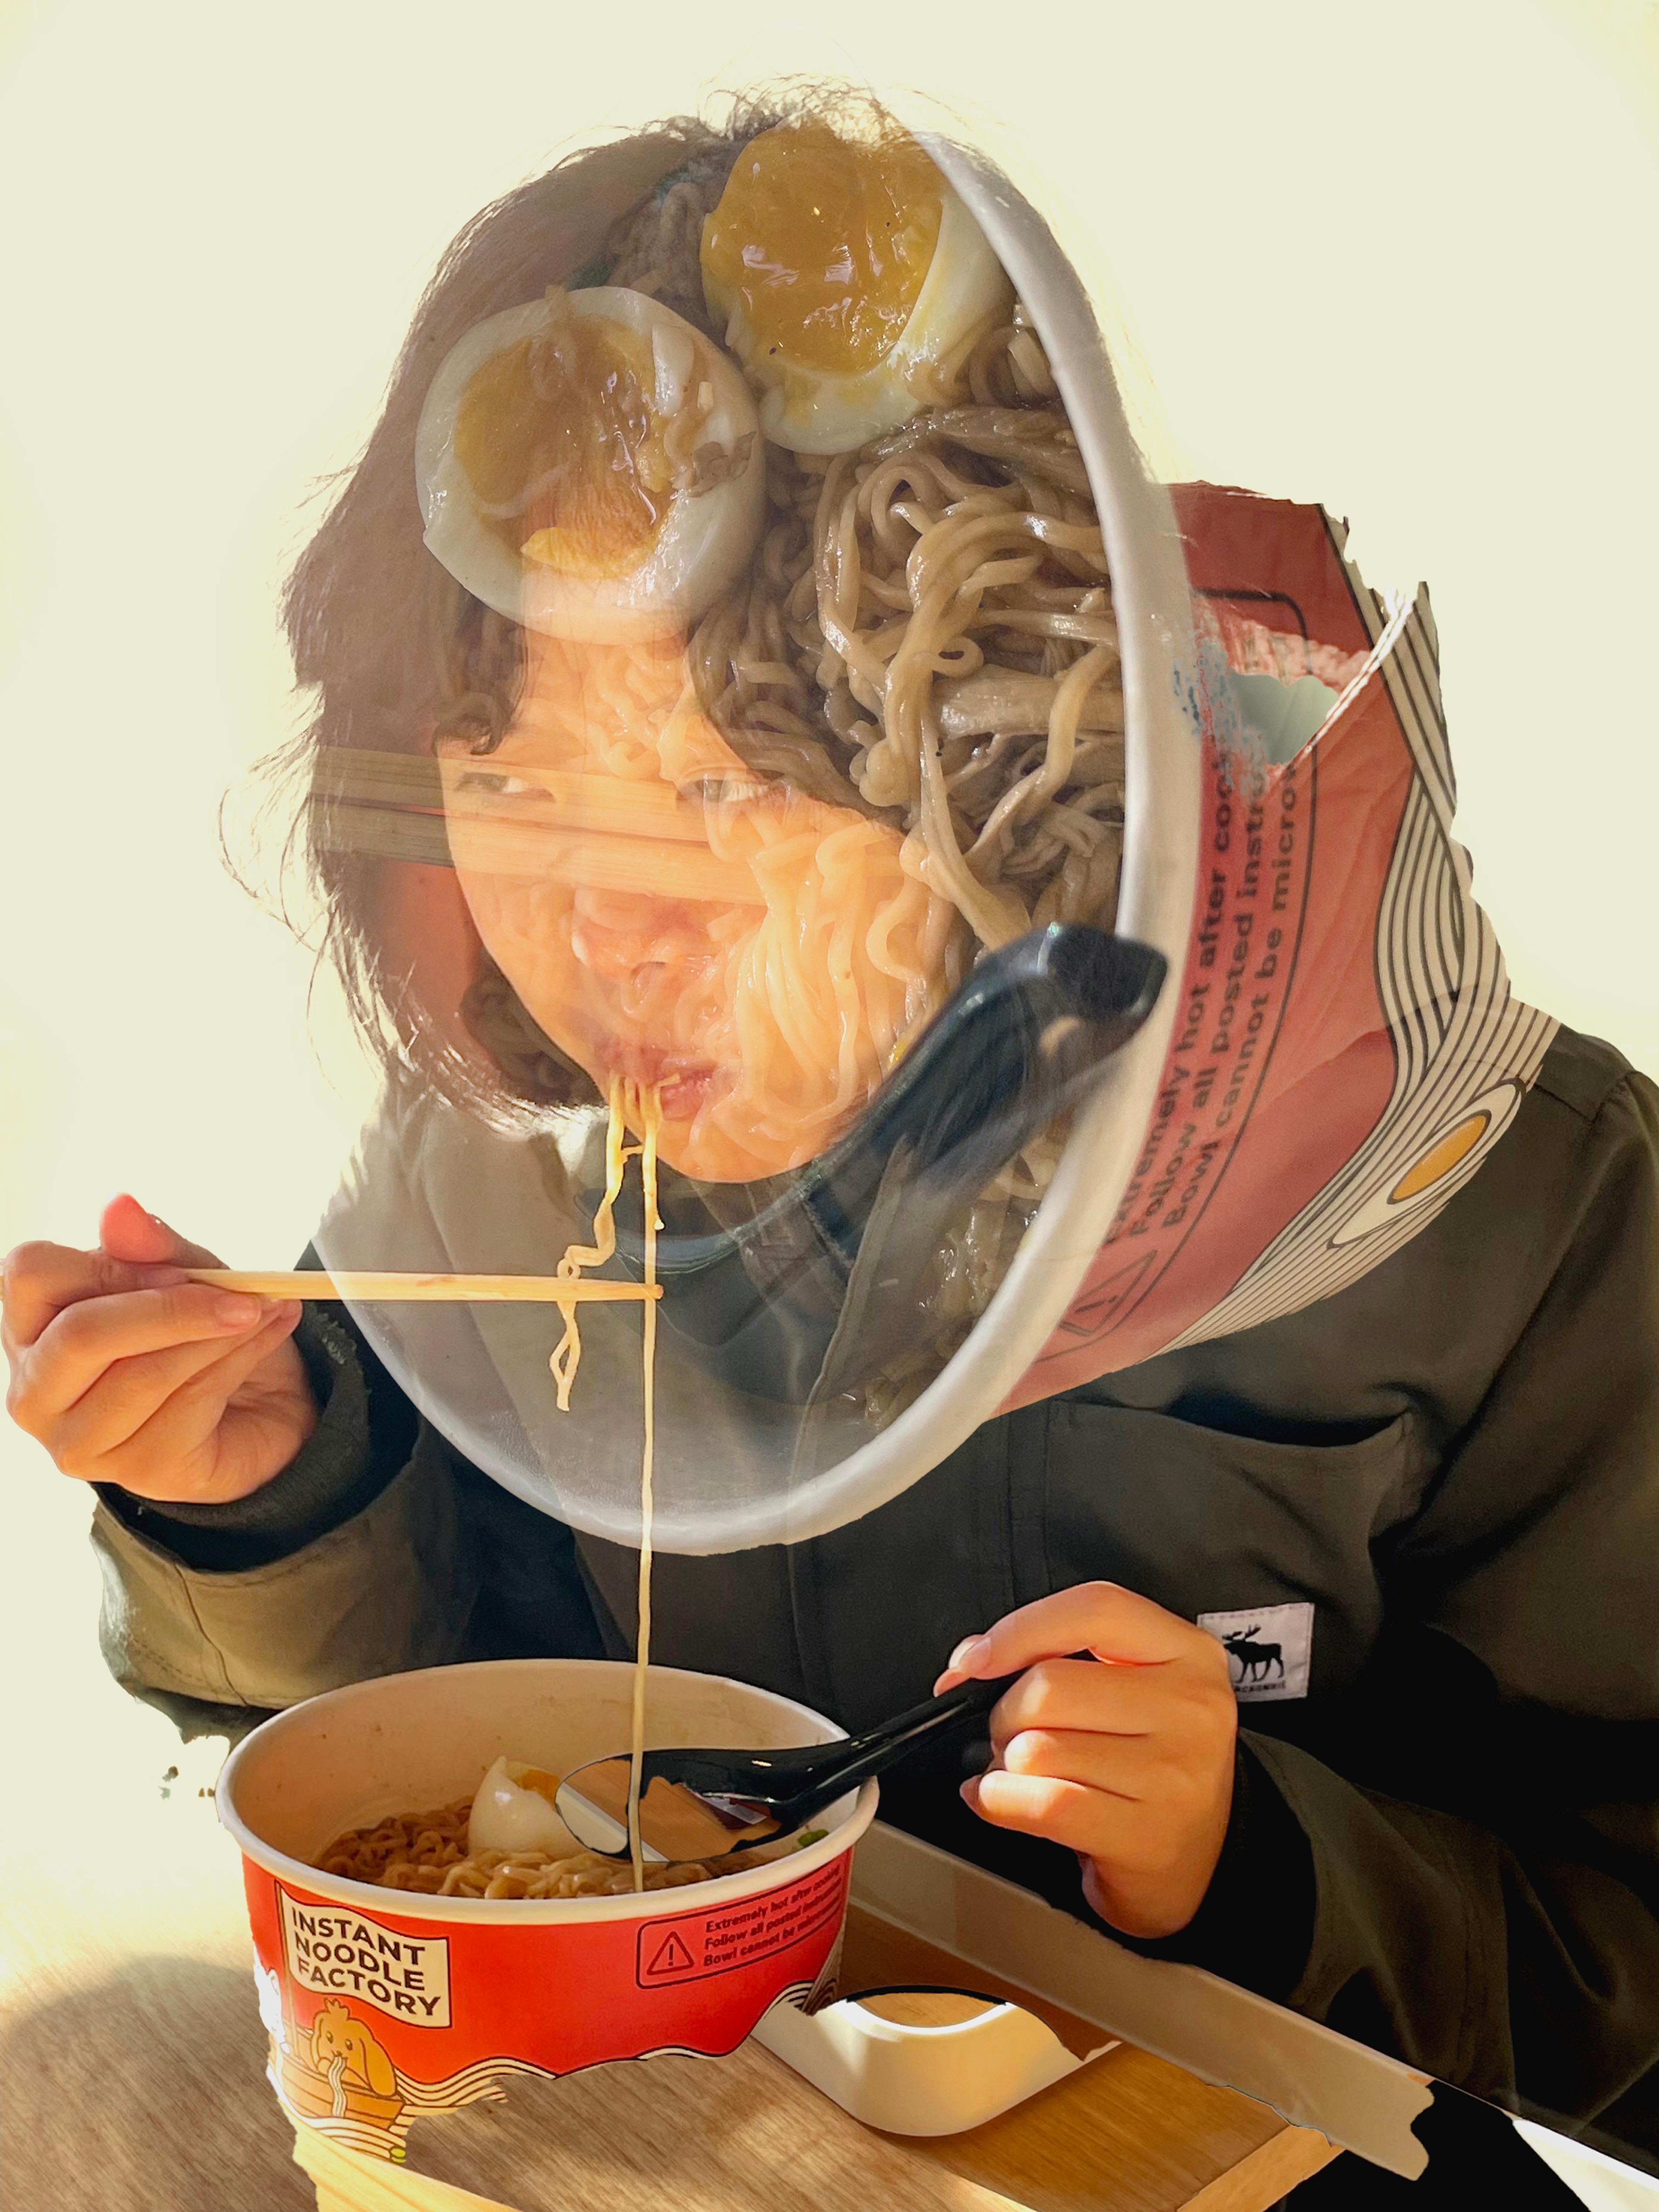 Digital-media photograph of a dark-haired adolescent Asian girl seated at a wooden table, eating ramen noodles from a large, red paper container, using chopsticks in her right hand and holding a black soup spoon in her left hand. The girl leans over the table, facing left, and wears a heavy gray coat. A long noodle runs from her lips to the container below, partially held by the chopsticks. Supermiposed on the girl's face is a sideways translucent photo of the open top of the red container, showing noodles, two halves of a boiled egg, and the black soup spoon dug into the noodles.